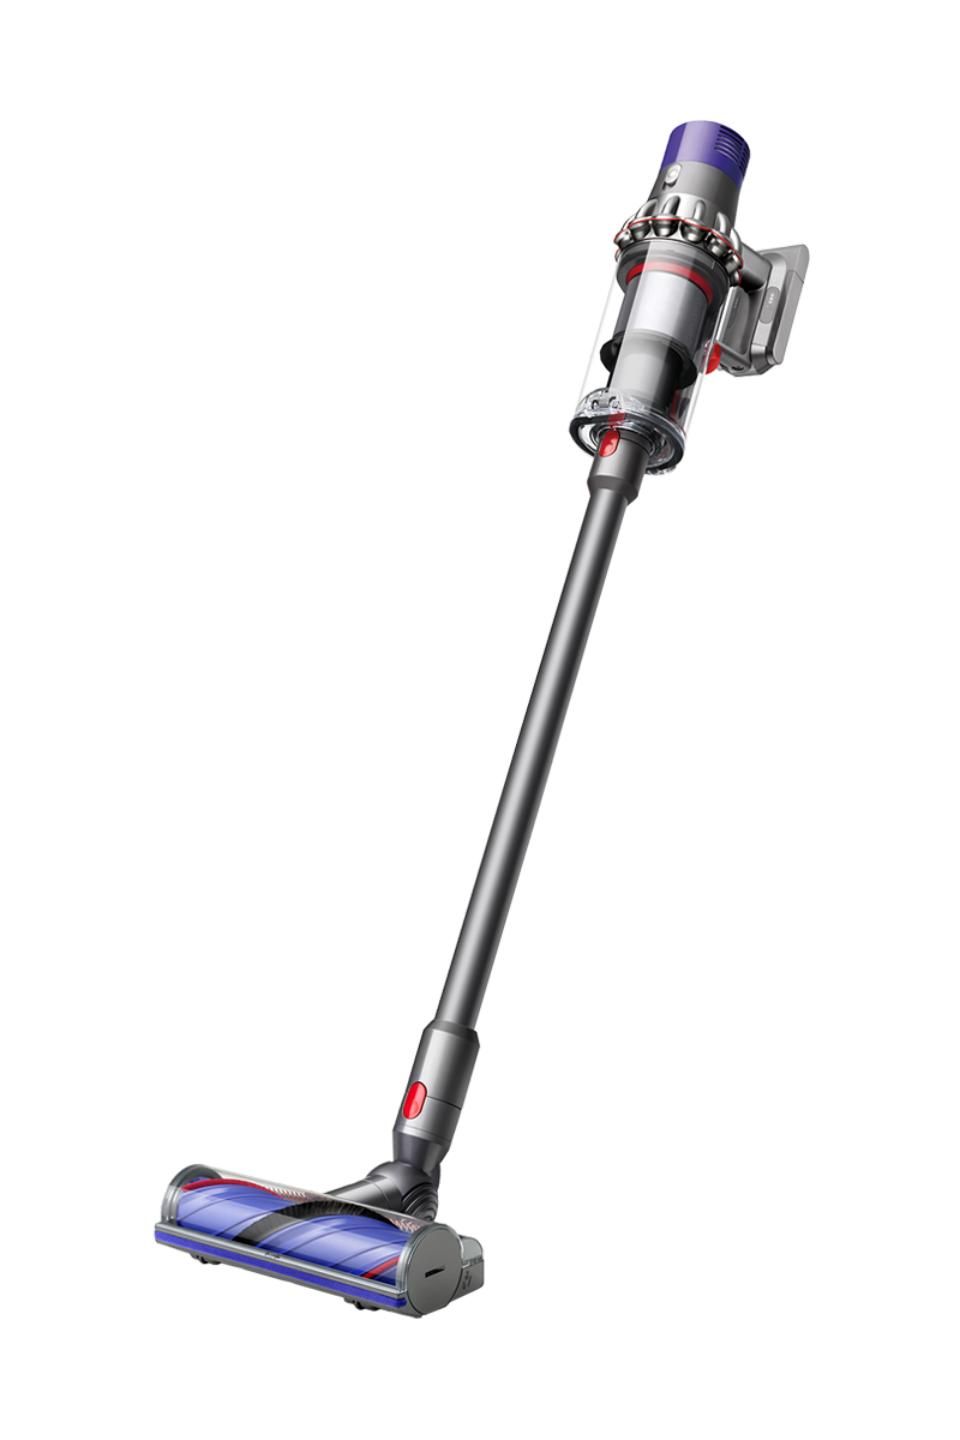 Dyson V8 vs. V10: difference two cordless vacuums